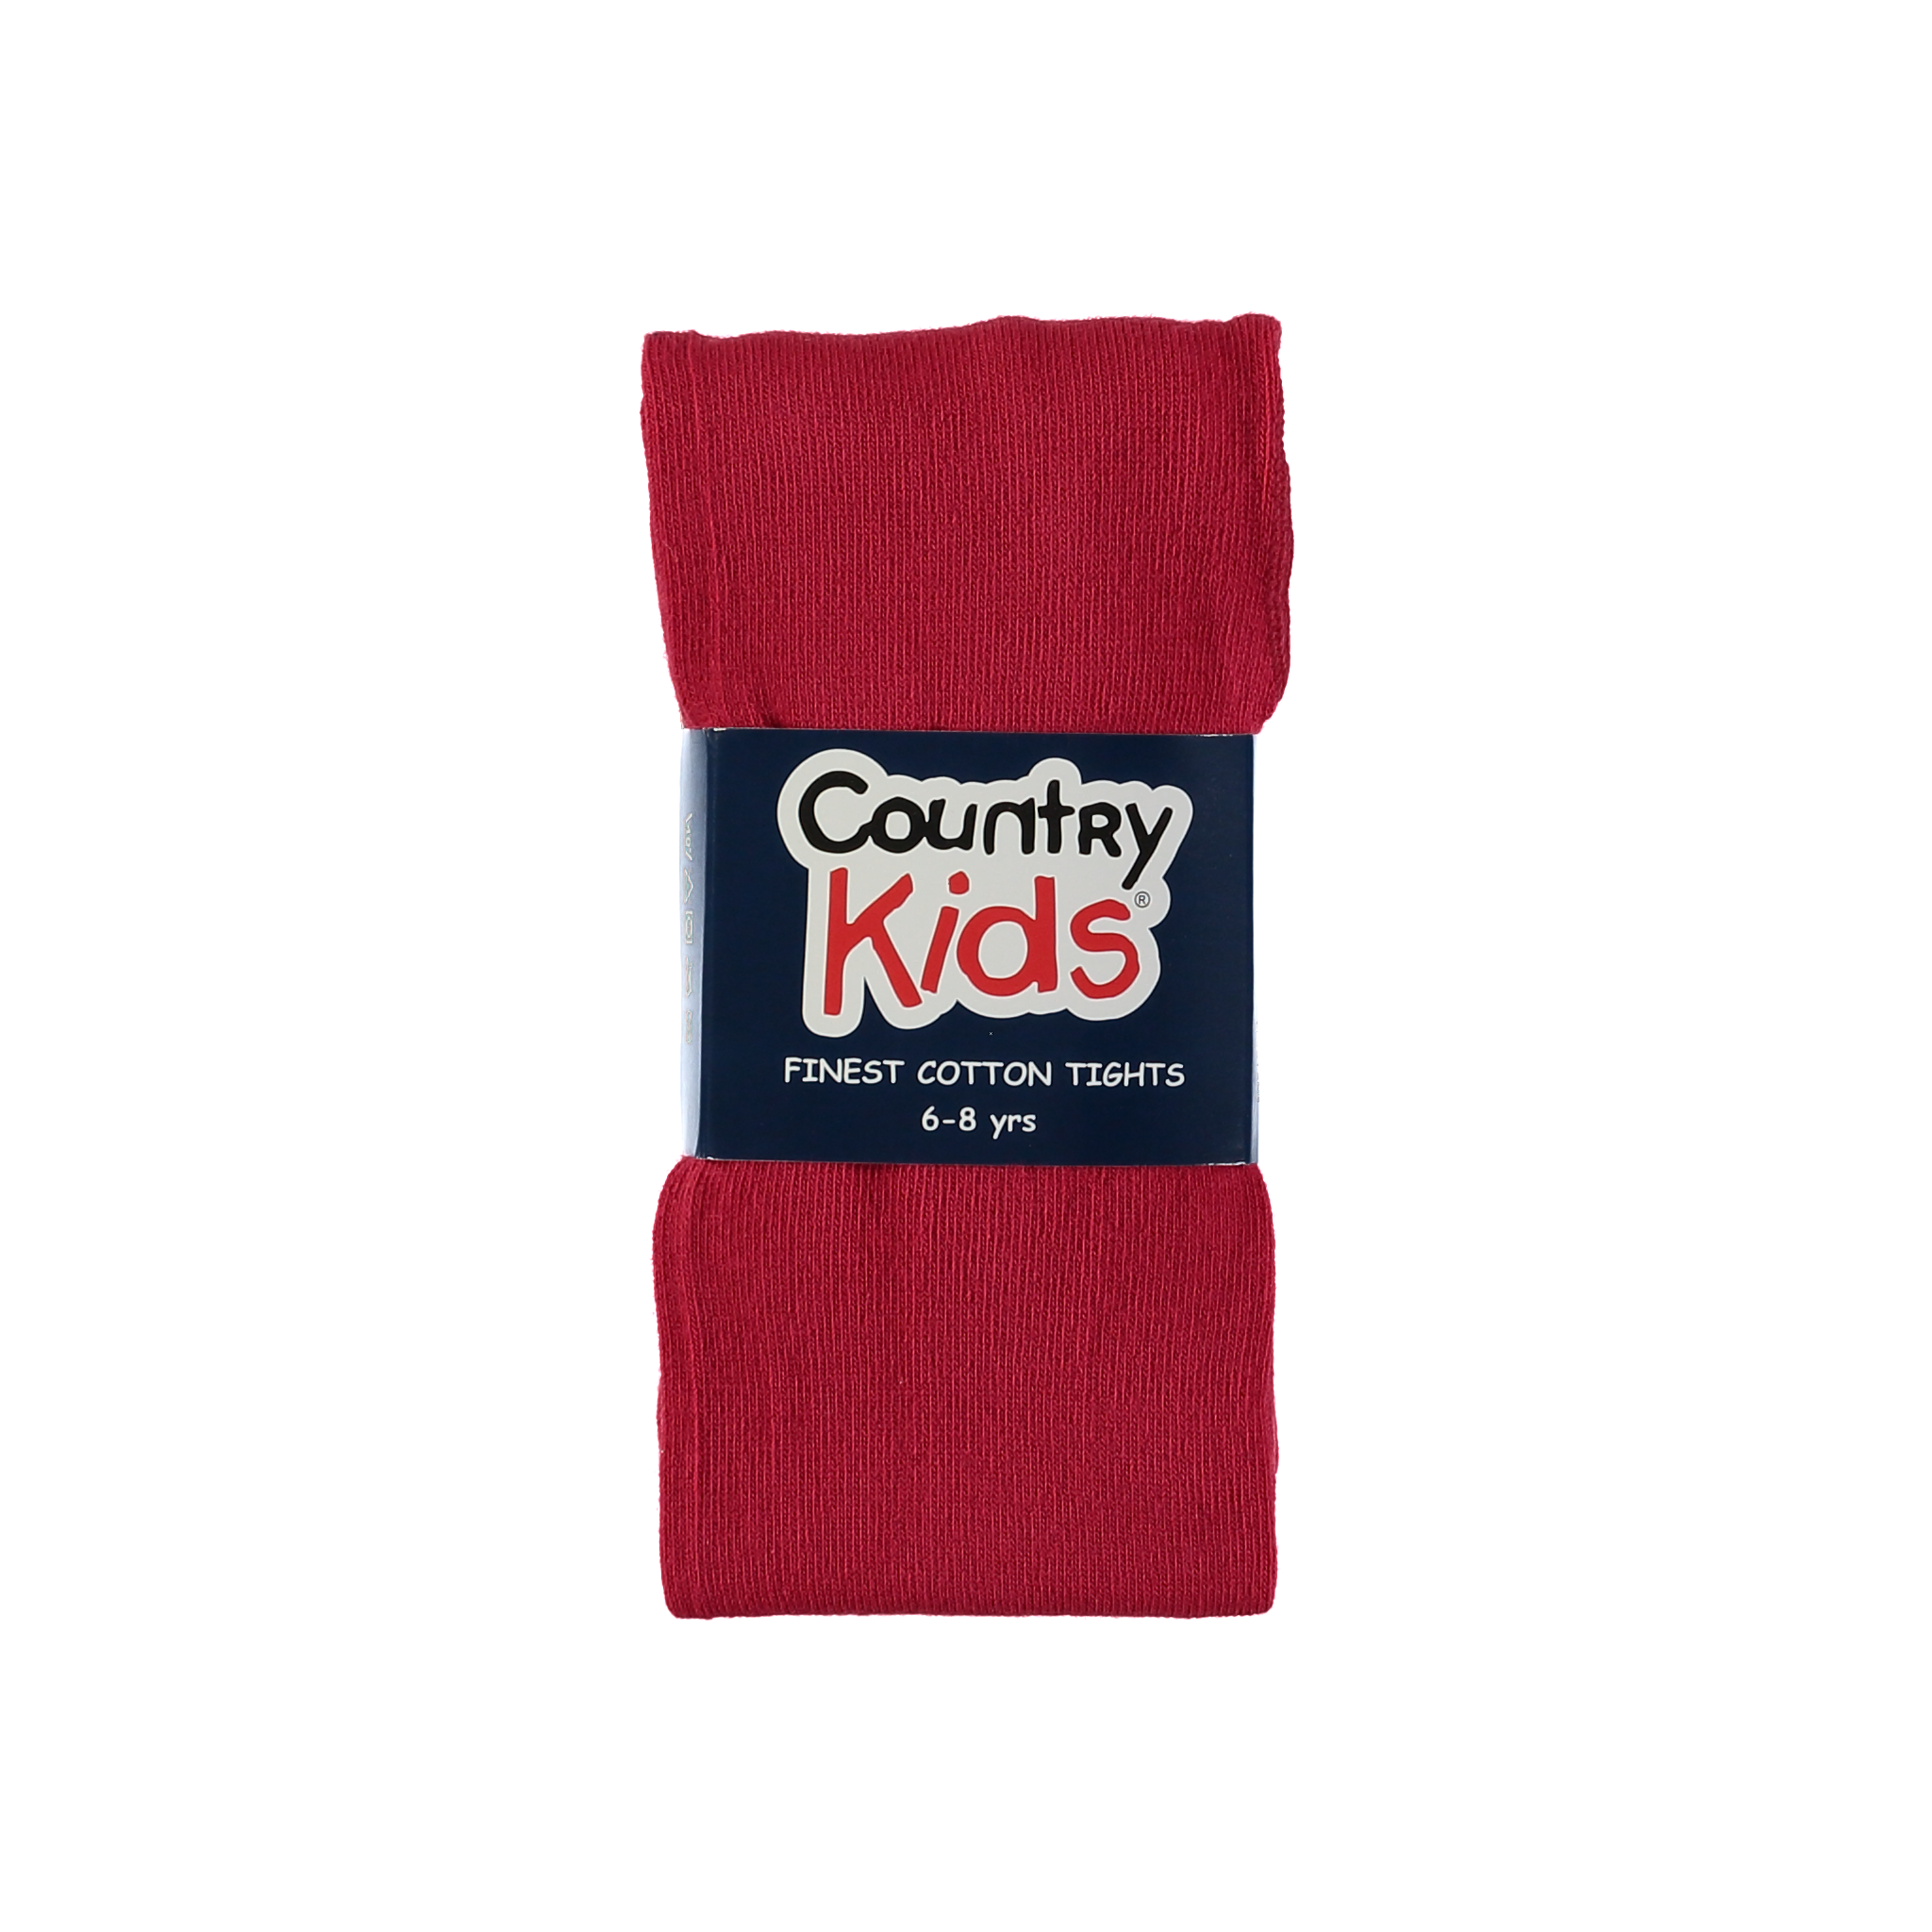 Luxury Cotton Tights in Ruby Red - Country Kids